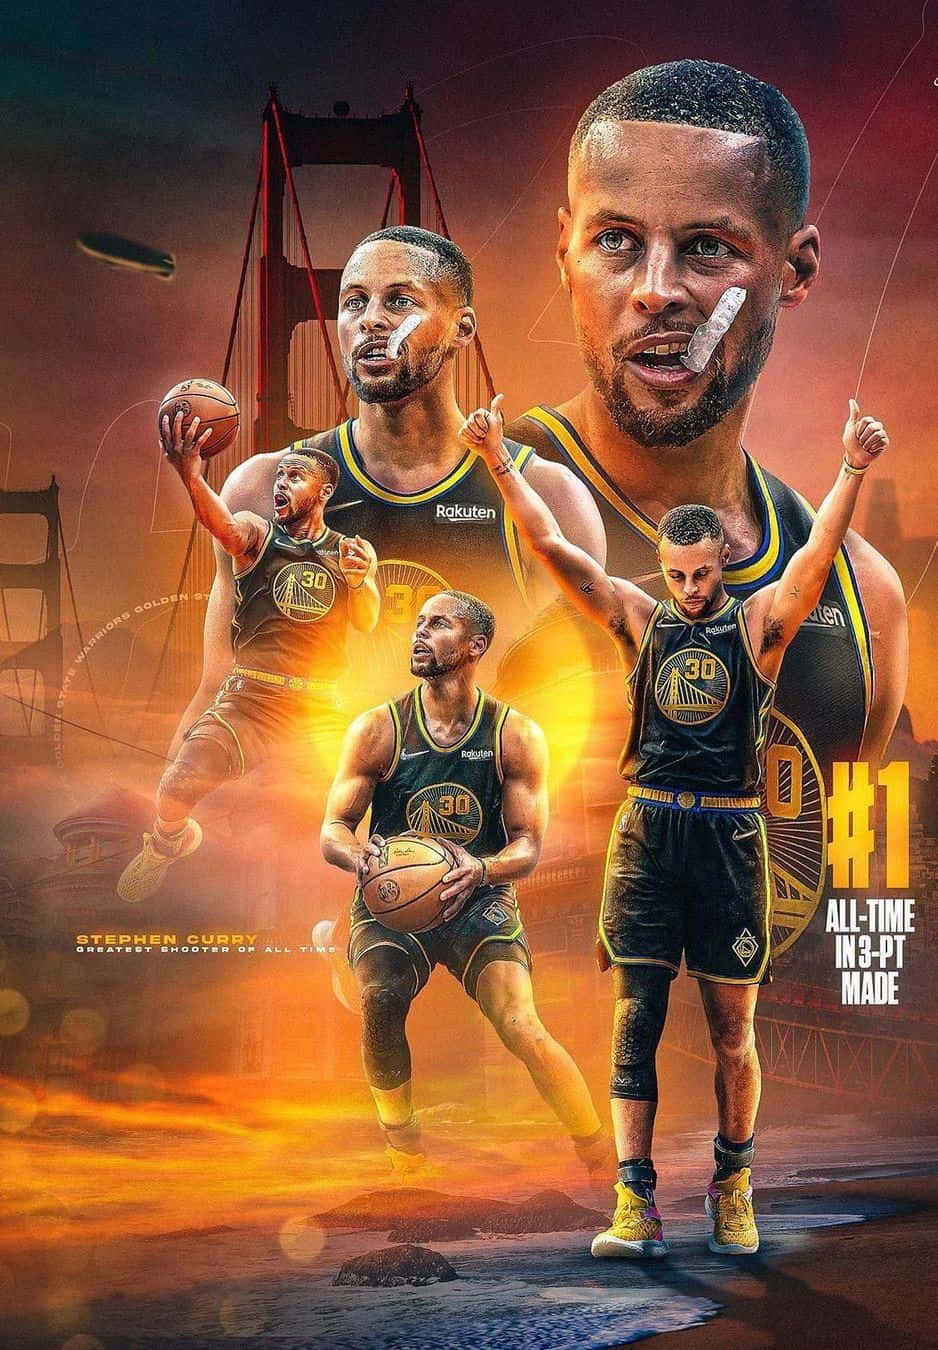 steph curry wallpaper